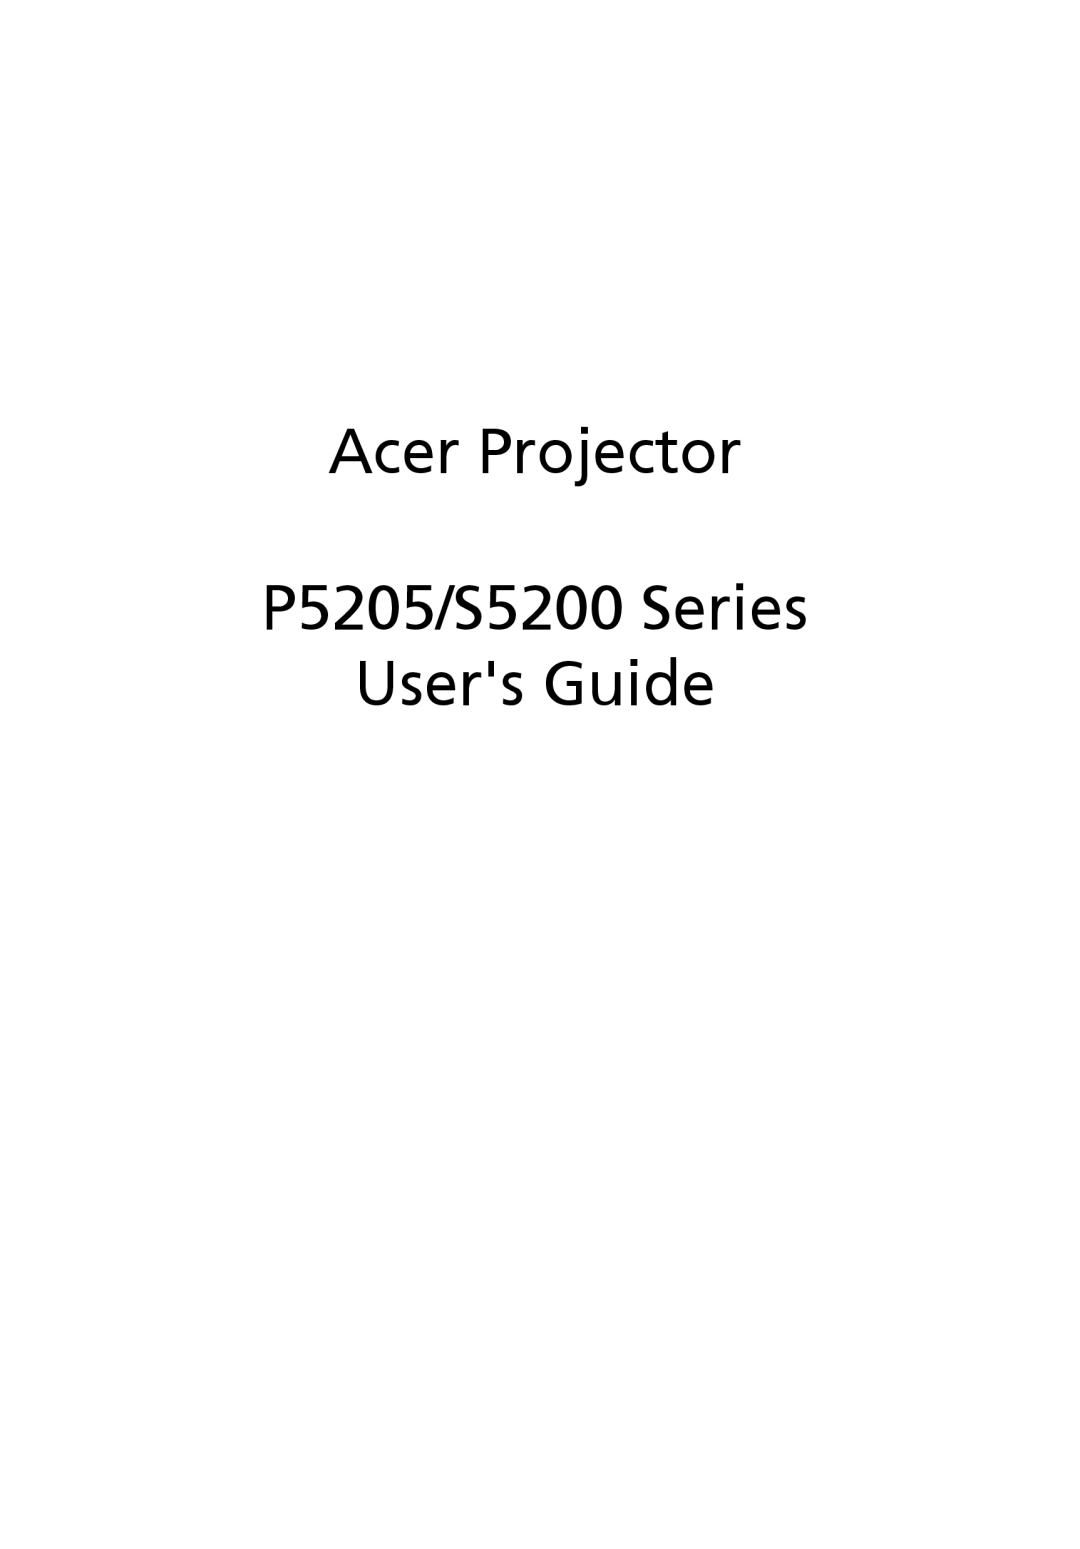 Acer manual Acer Projector P5205/S5200 Series Users Guide 